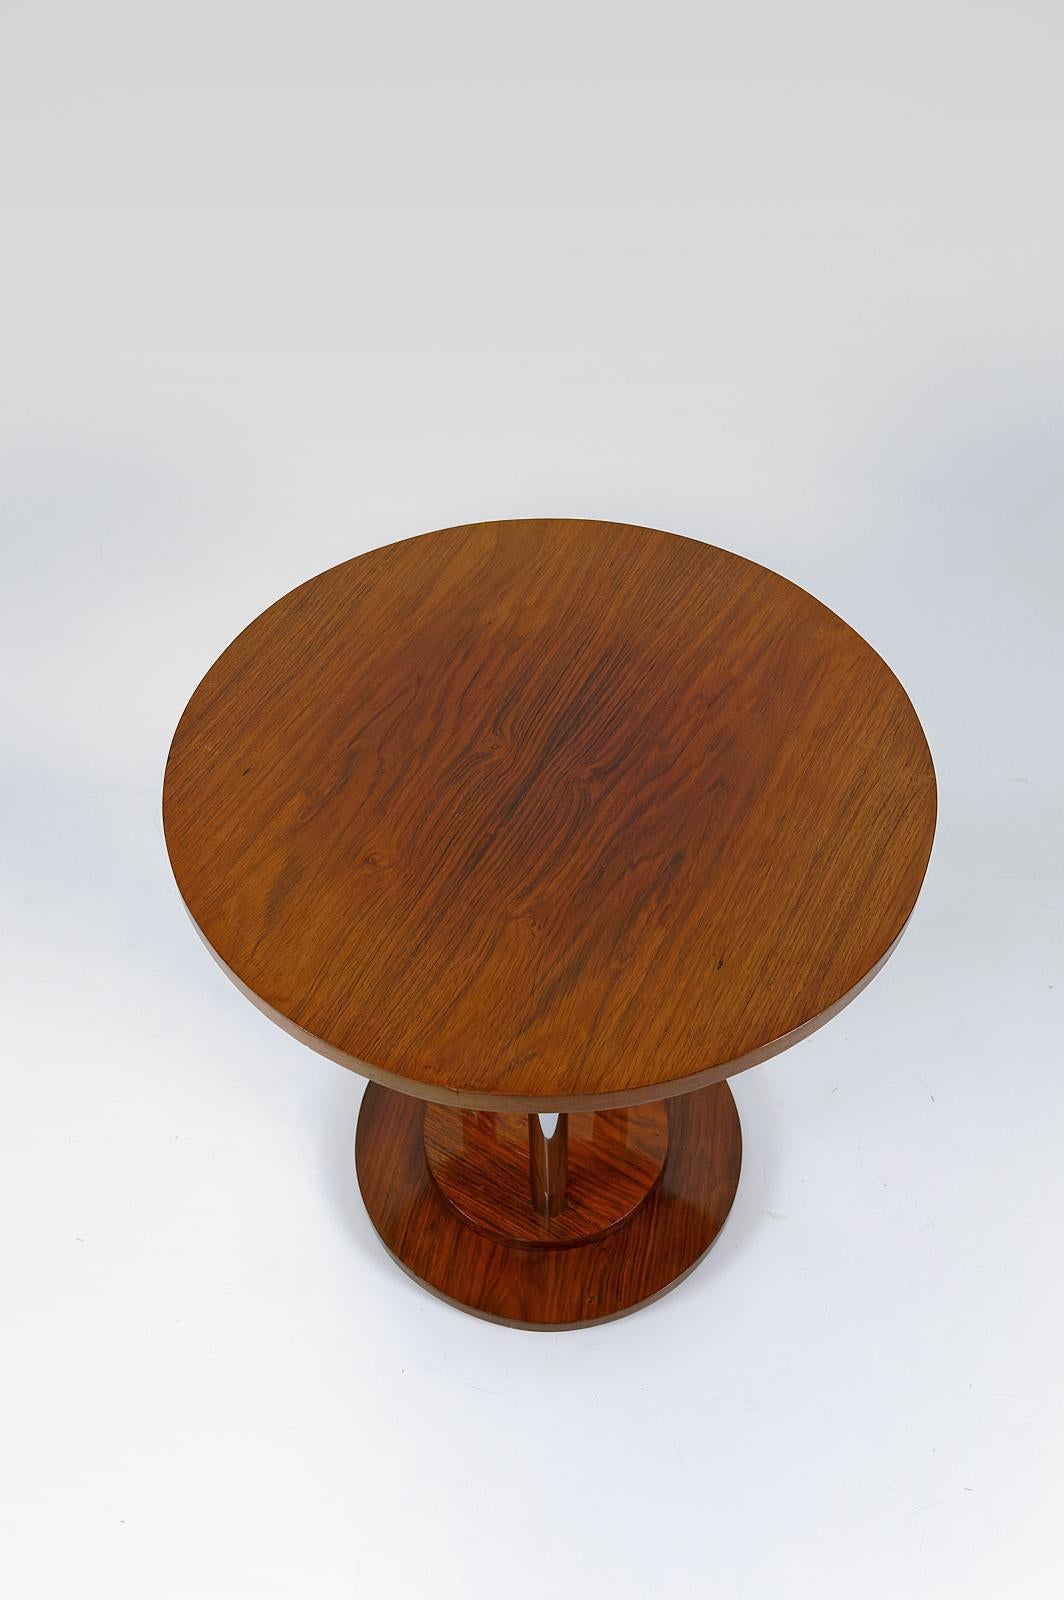 Modernist Art Deco pedestal table in walnut and chrome, France, Circa 1930 For Sale 3